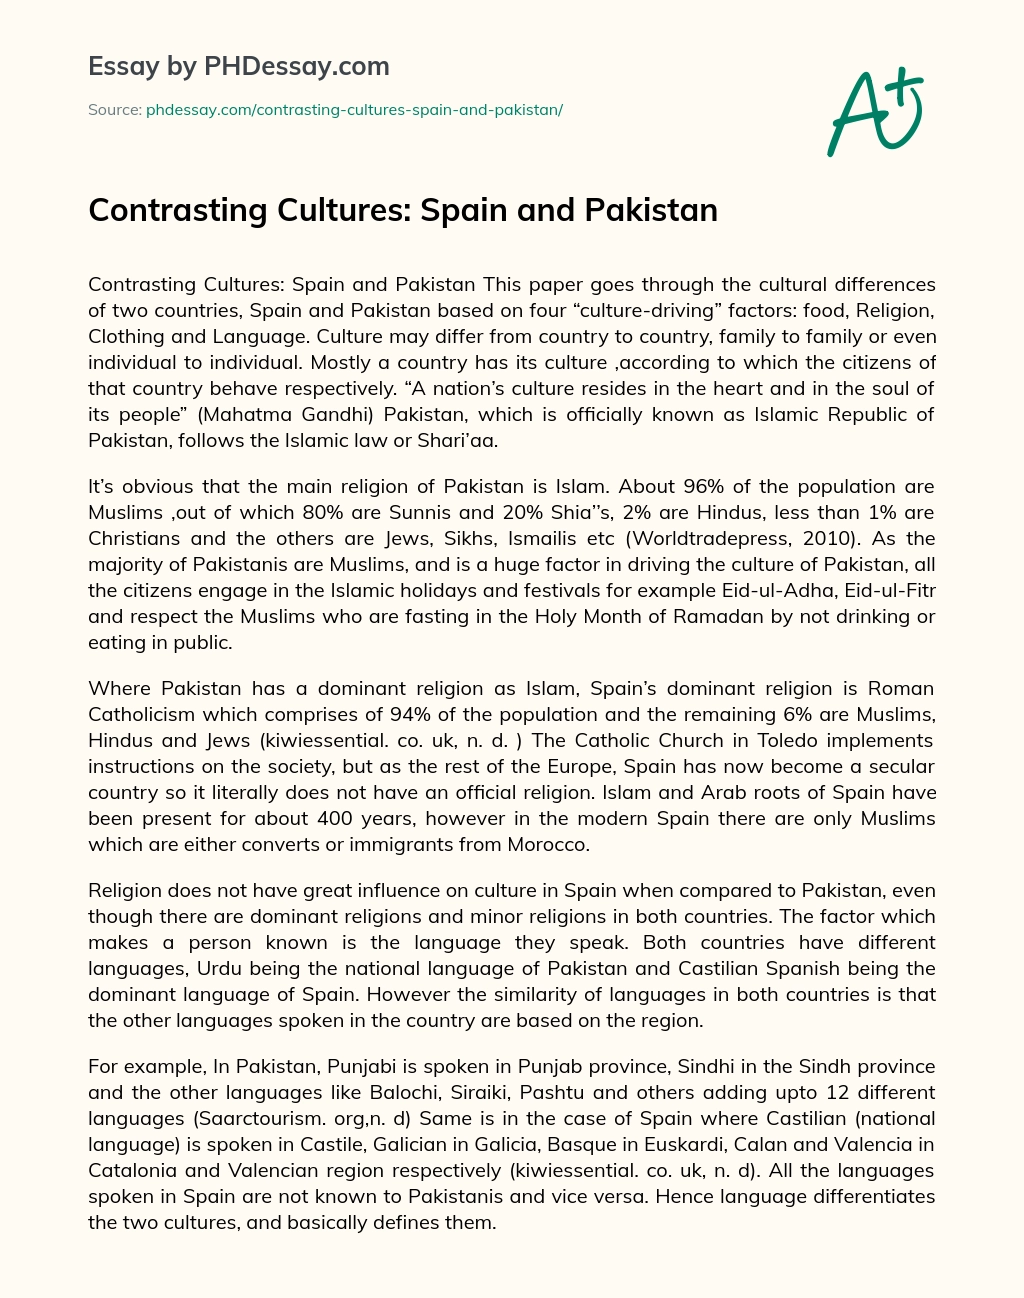 Contrasting Cultures: Spain and Pakistan essay